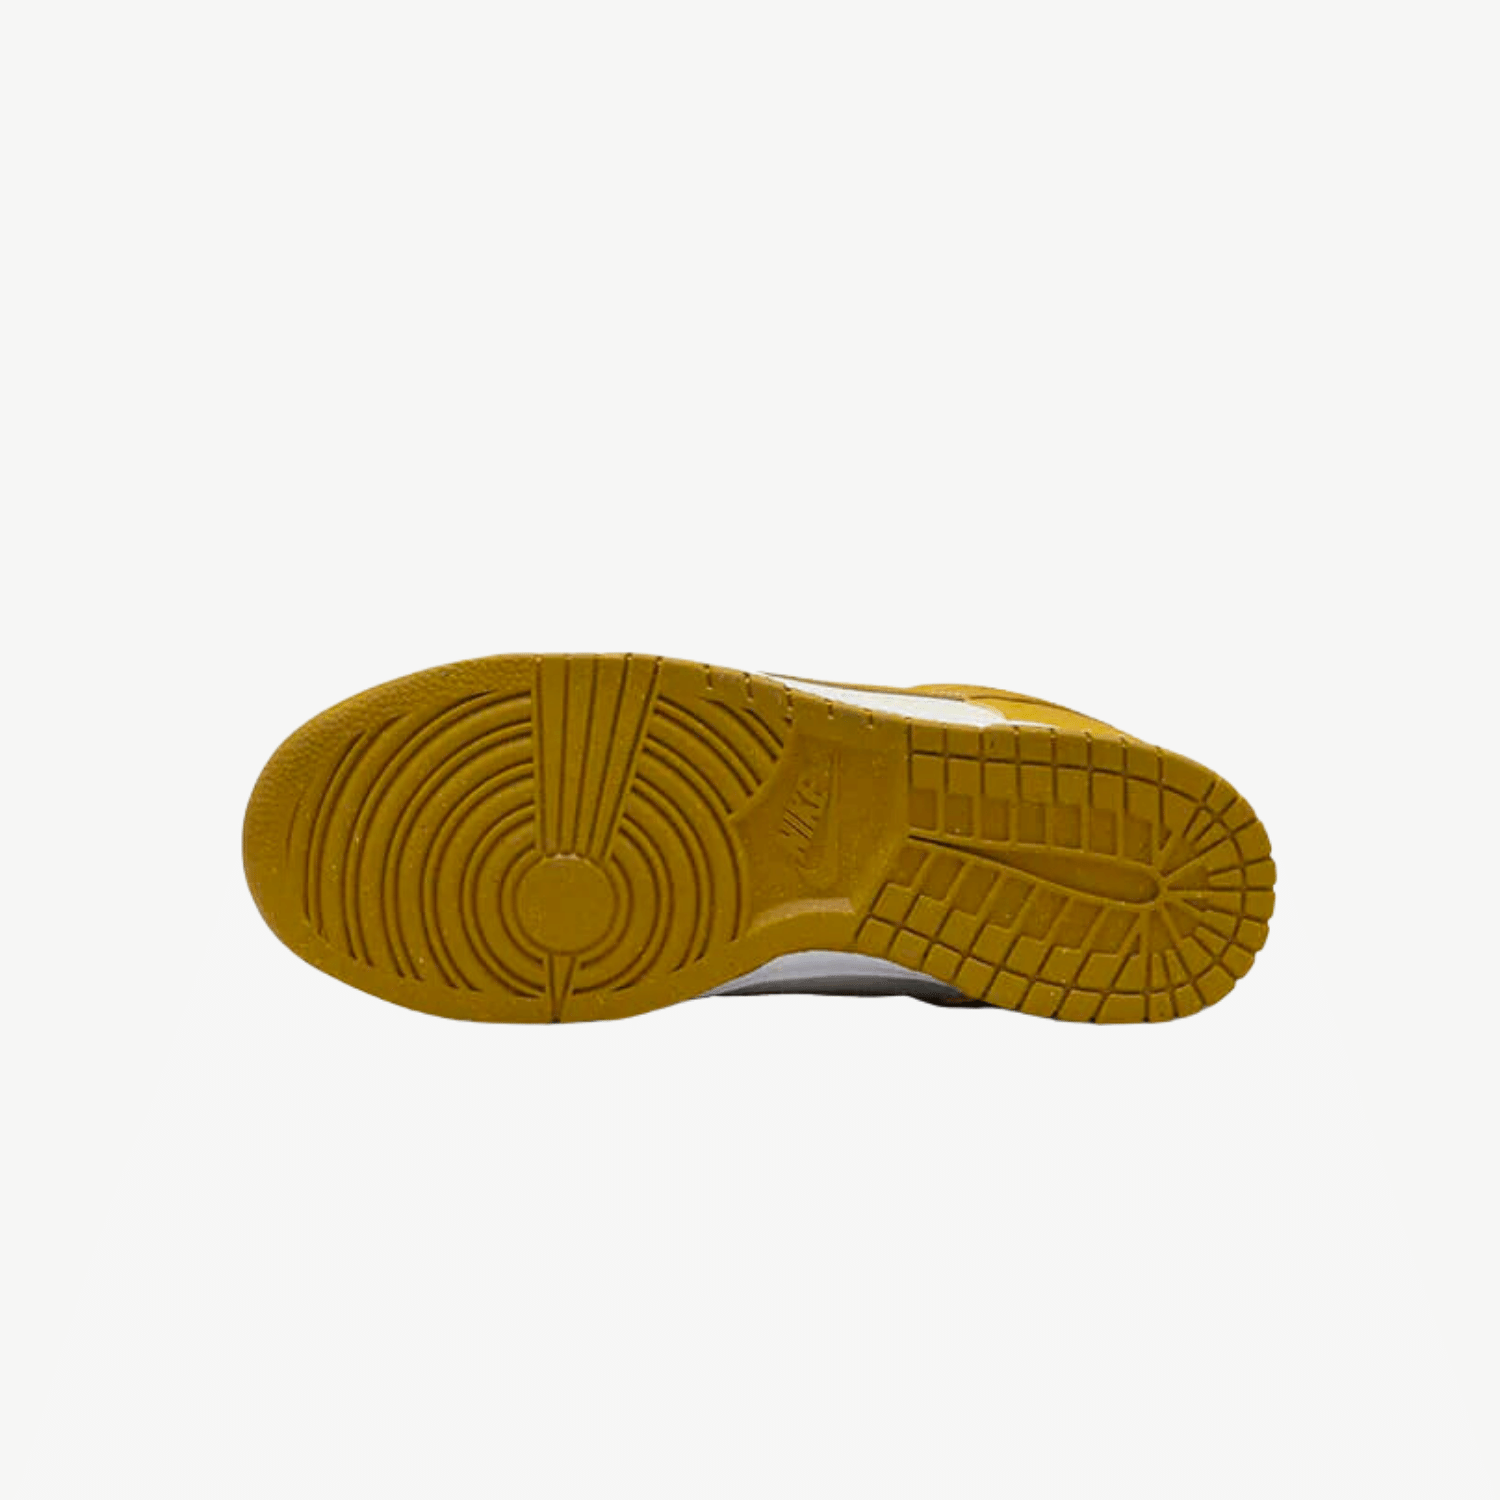    nike-dunk-low-gold-suede-DN1431-001-unfazed-3